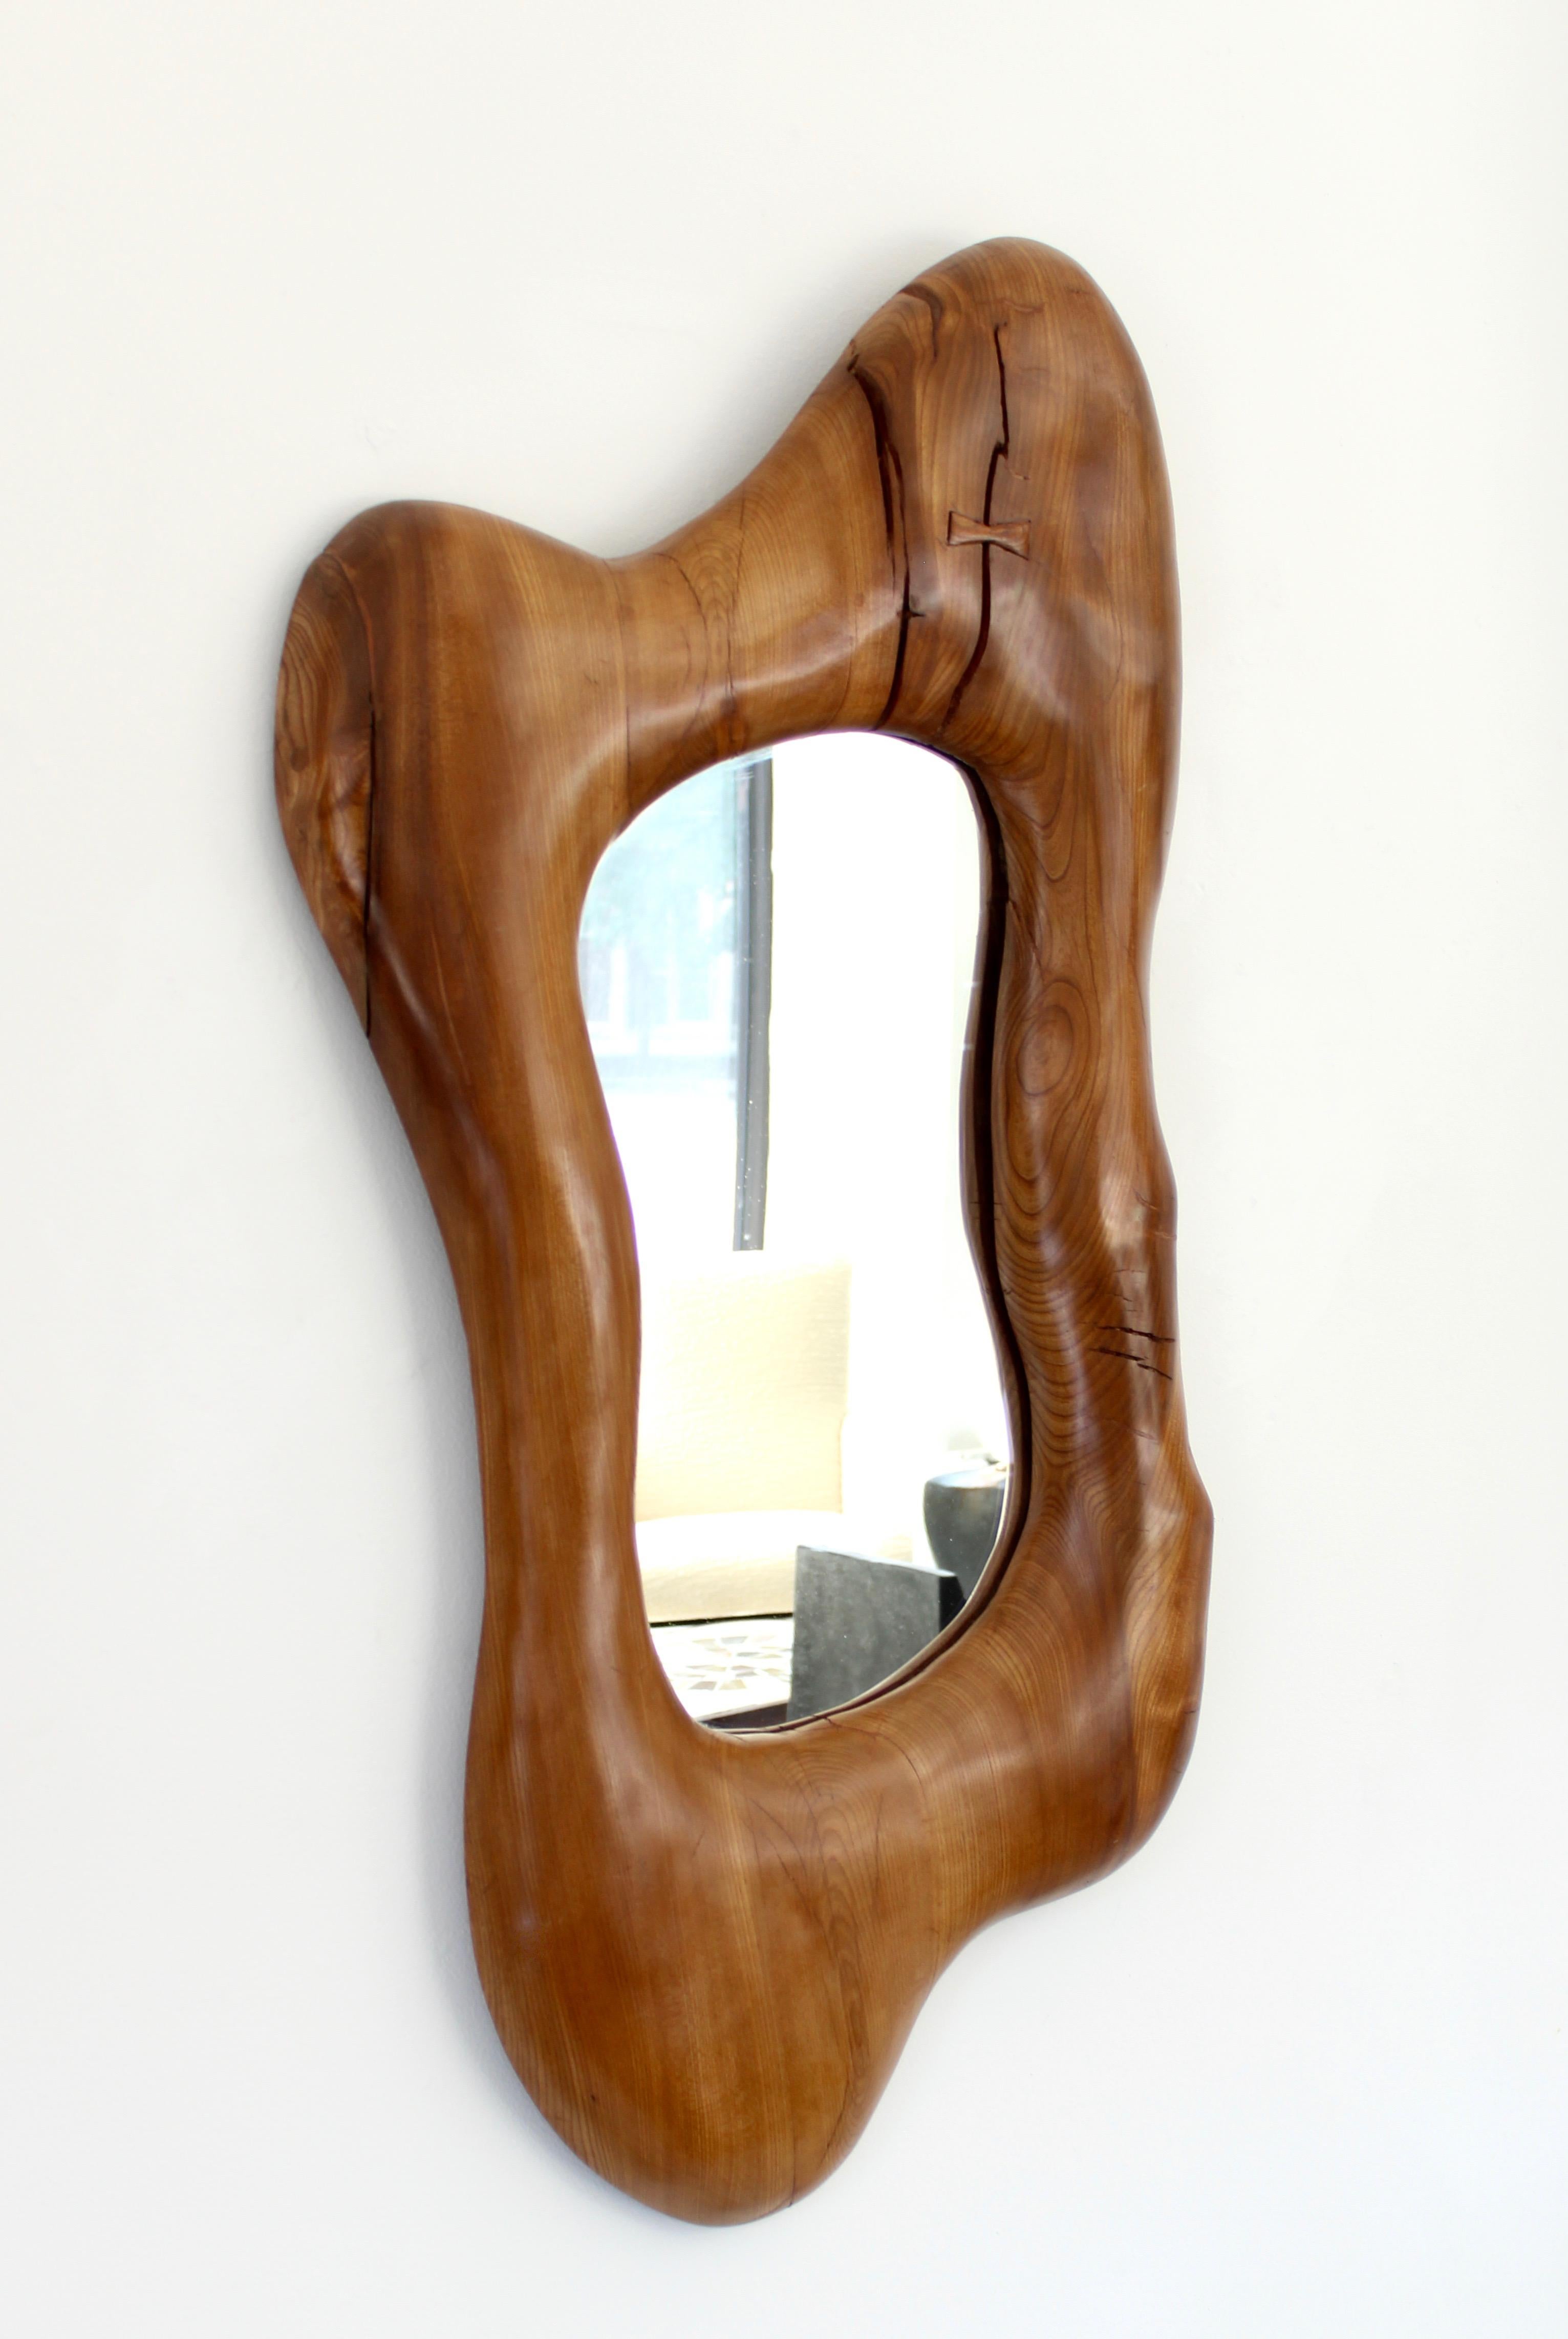 A contemporary organic modern large wall mirror in French elmwood with a butterfly closure in the spirit of Alexandre Noll and Nakashima.
Overall size: 24